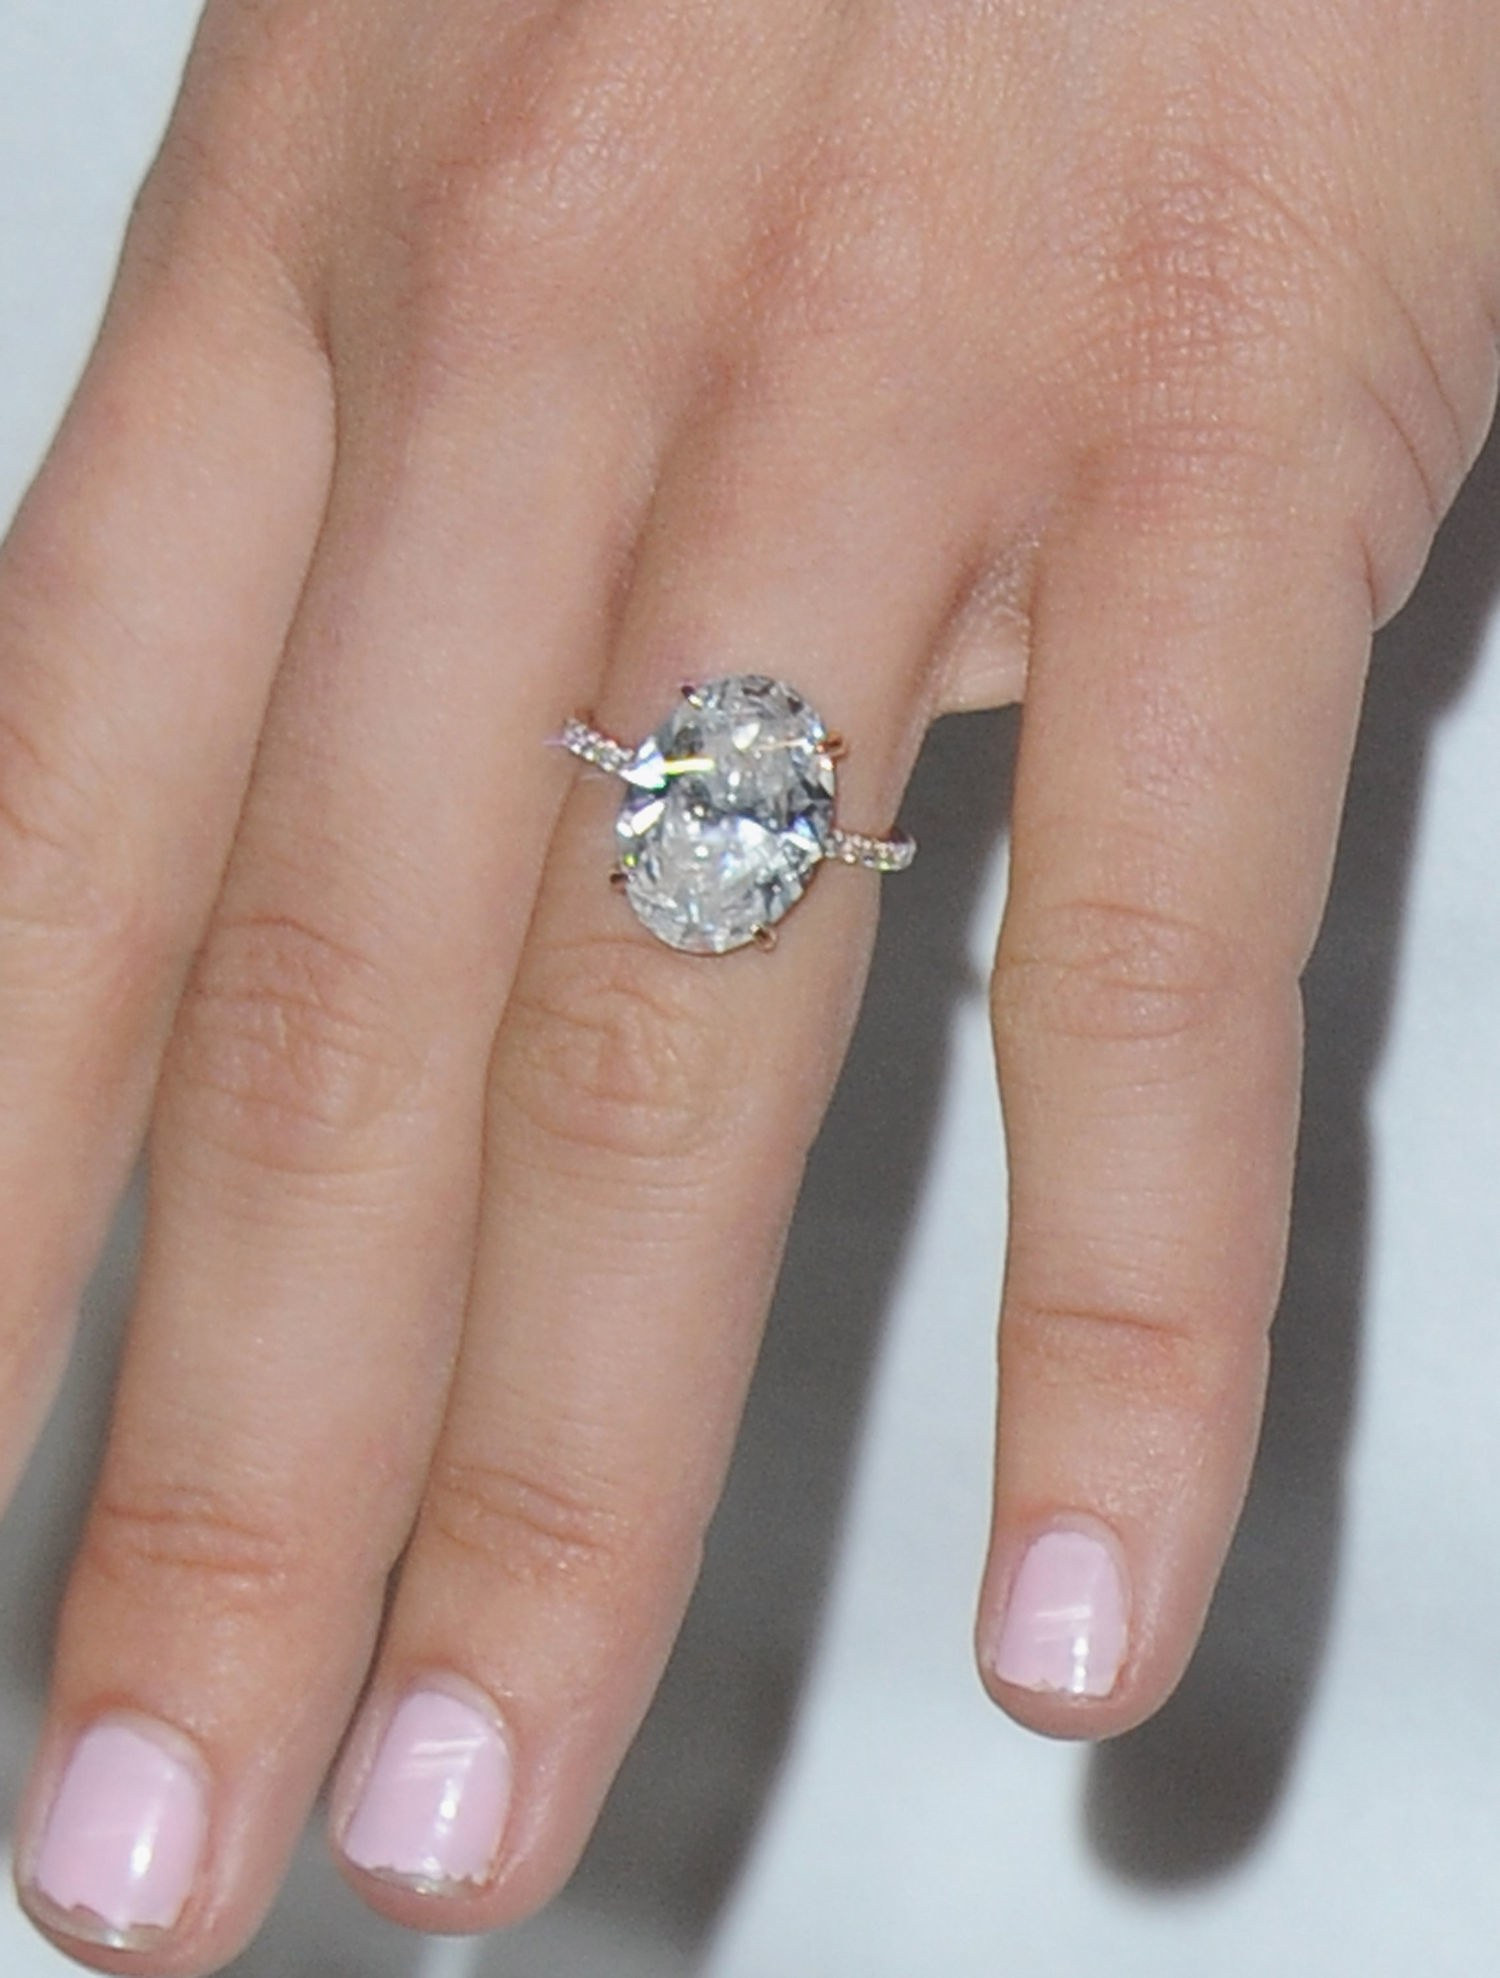 Best Wedding Ring
 The 7 Most Gorgeous Celebrity Engagement Rings of 2015